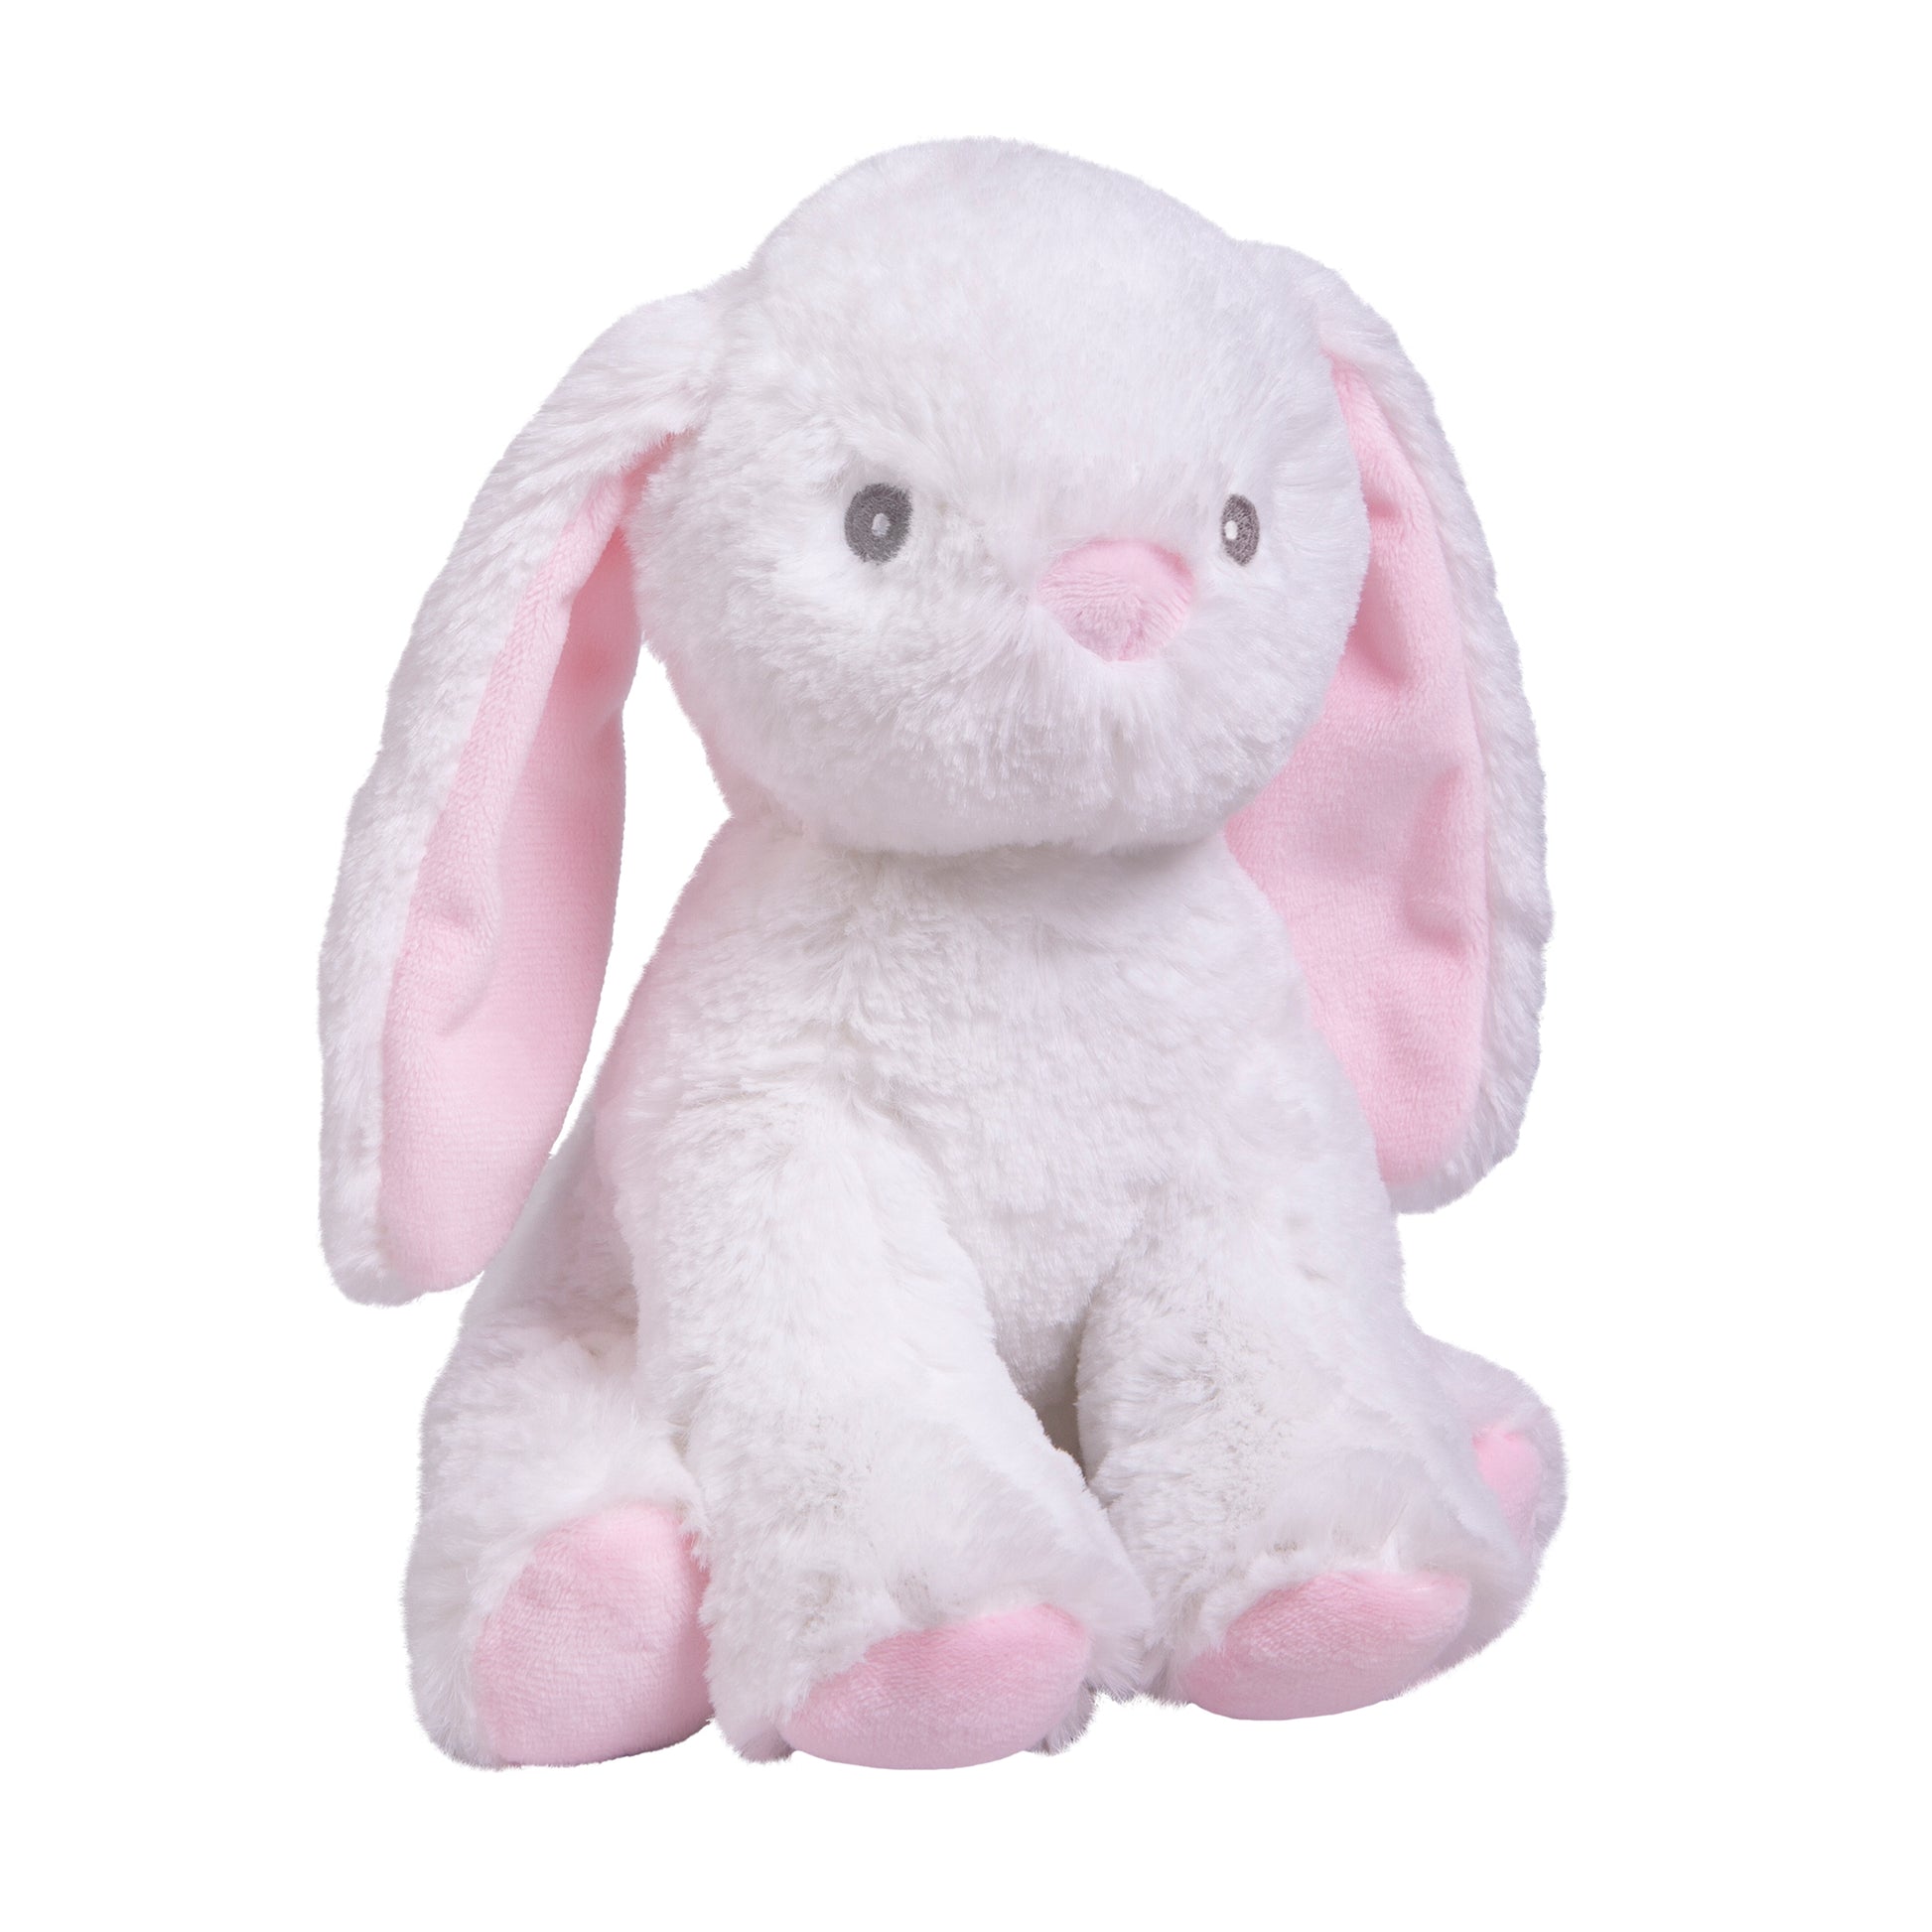  Emma 4 Piece Crib Bedding Collection by Sammy and Lou; bunny plush toyis made of soft white plush fabric and measures 9 inches tall